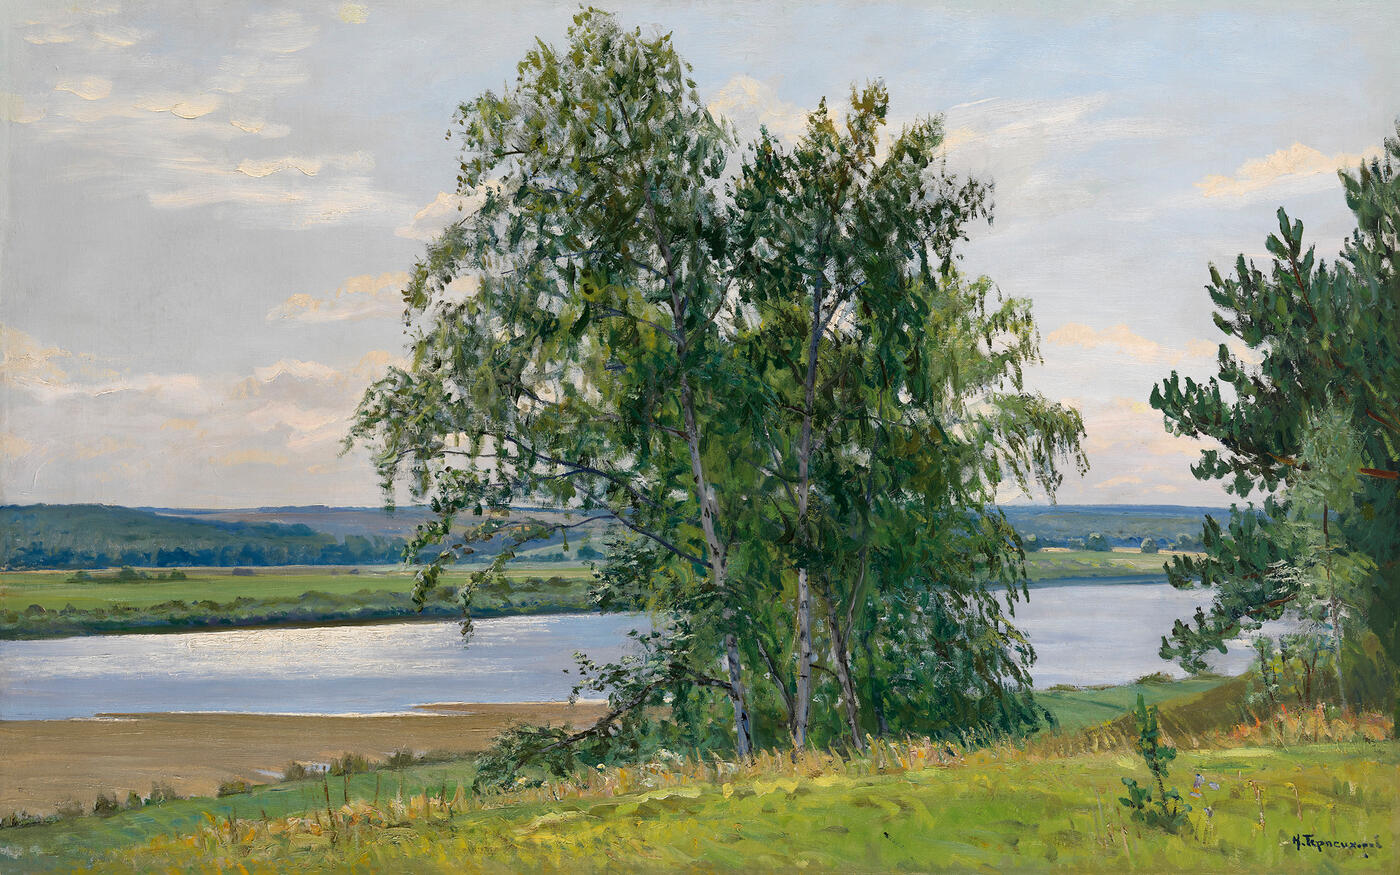 By the Oka River